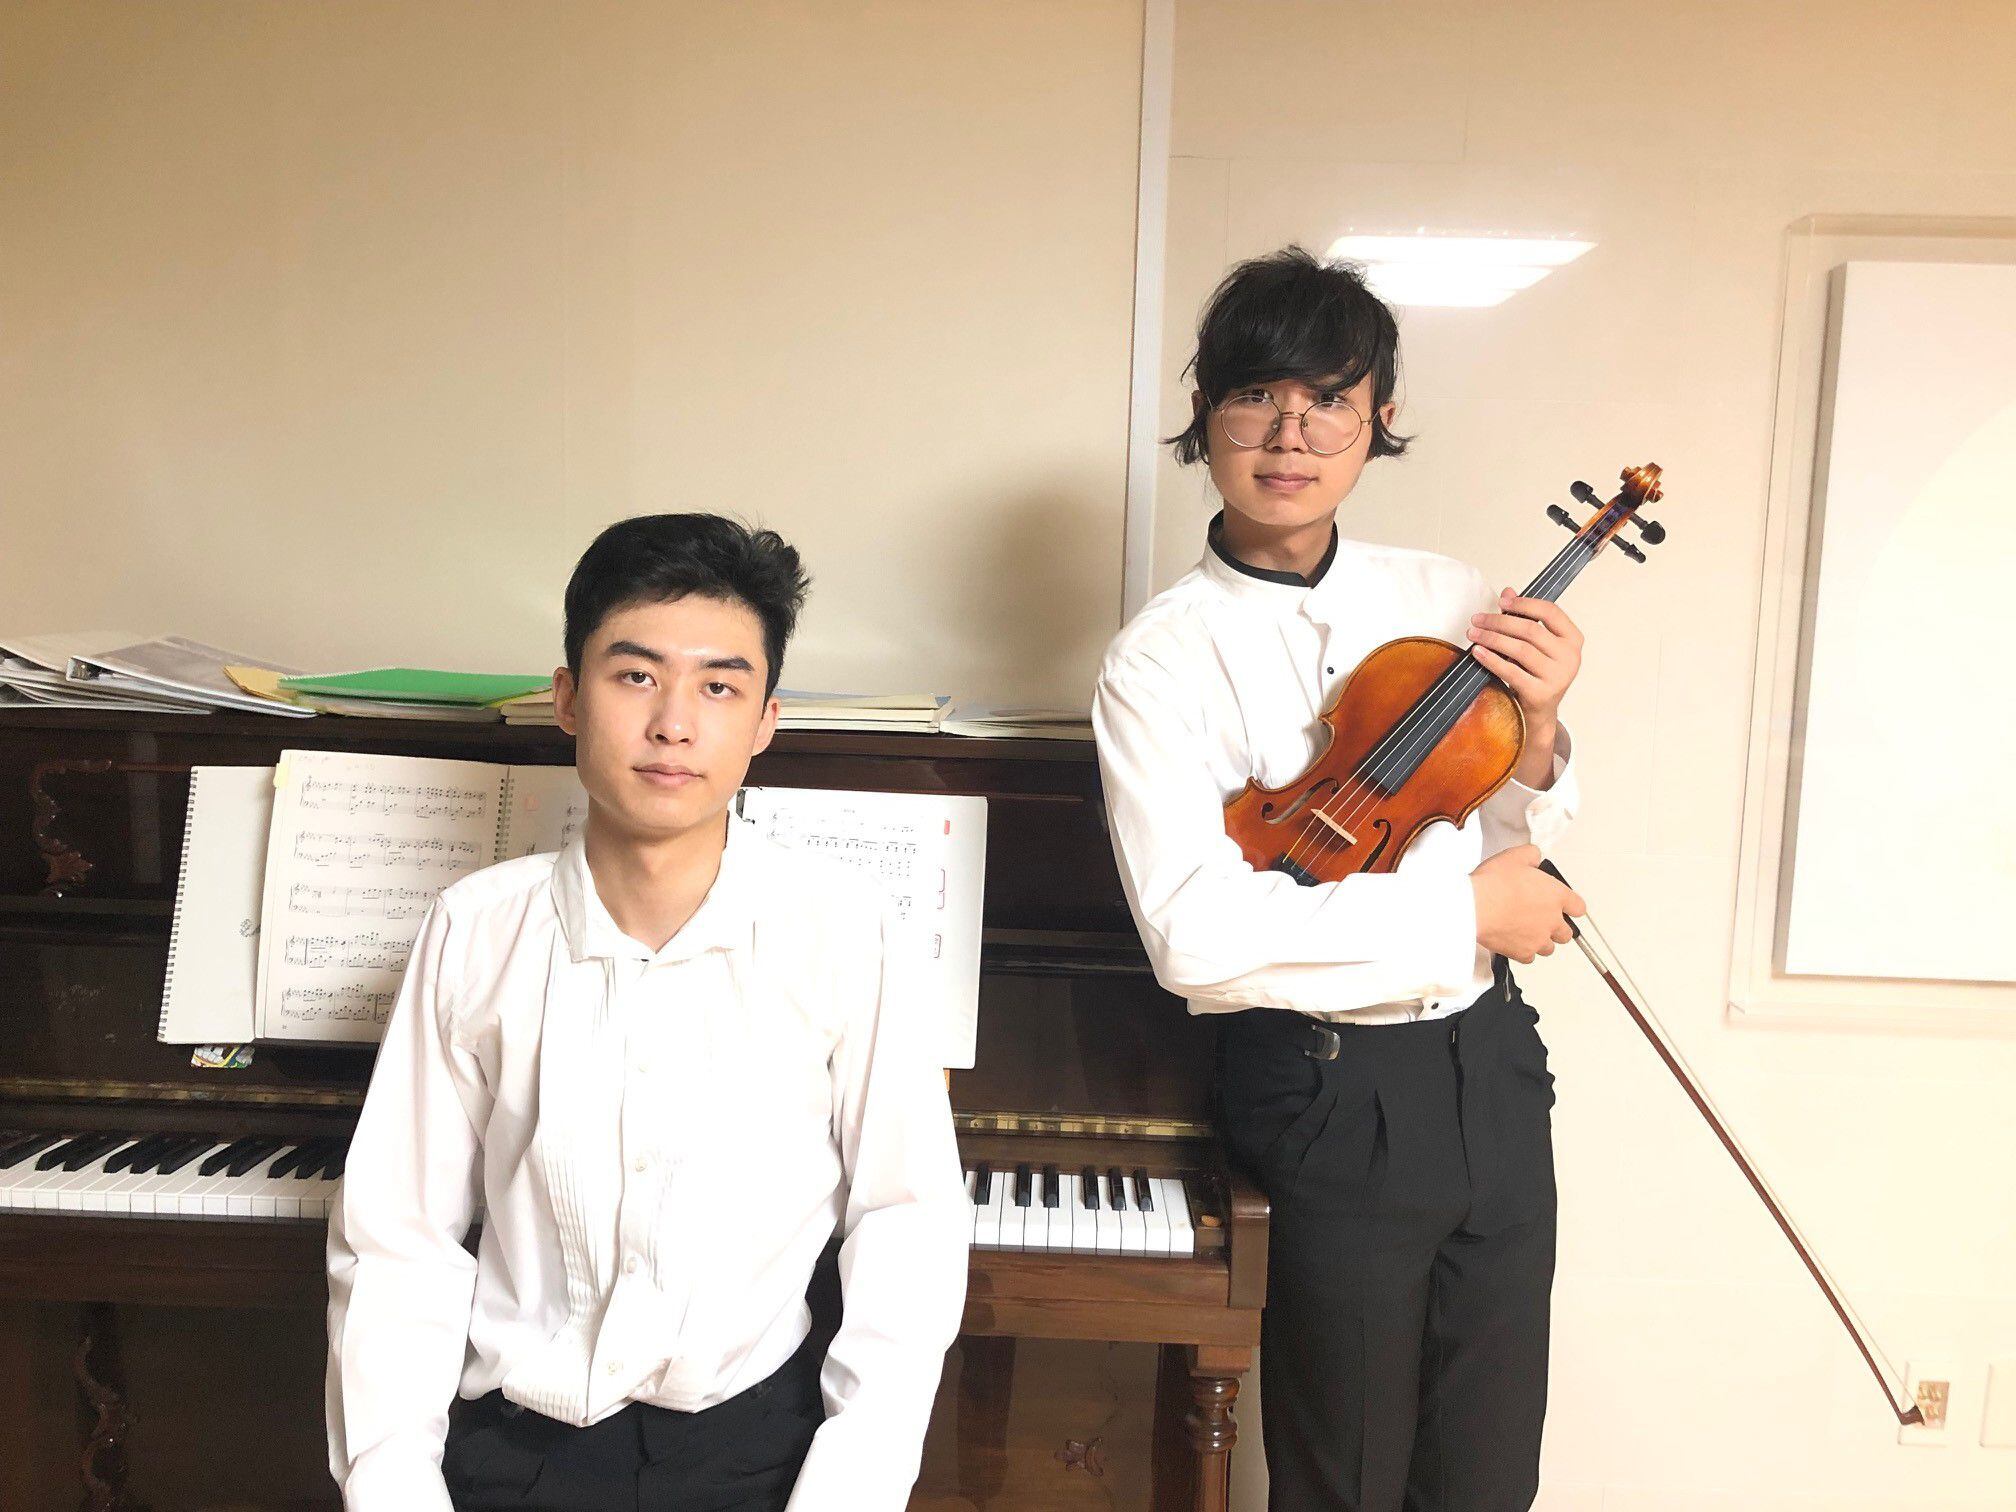 Violinist David Lee uses his passion and talent to help ease other people's mental stress. He and his brother Ralph founded Music Echoes to bring free music globally to places like hospitals, nursing homes and orphanages. (Courtesy of Lee family)